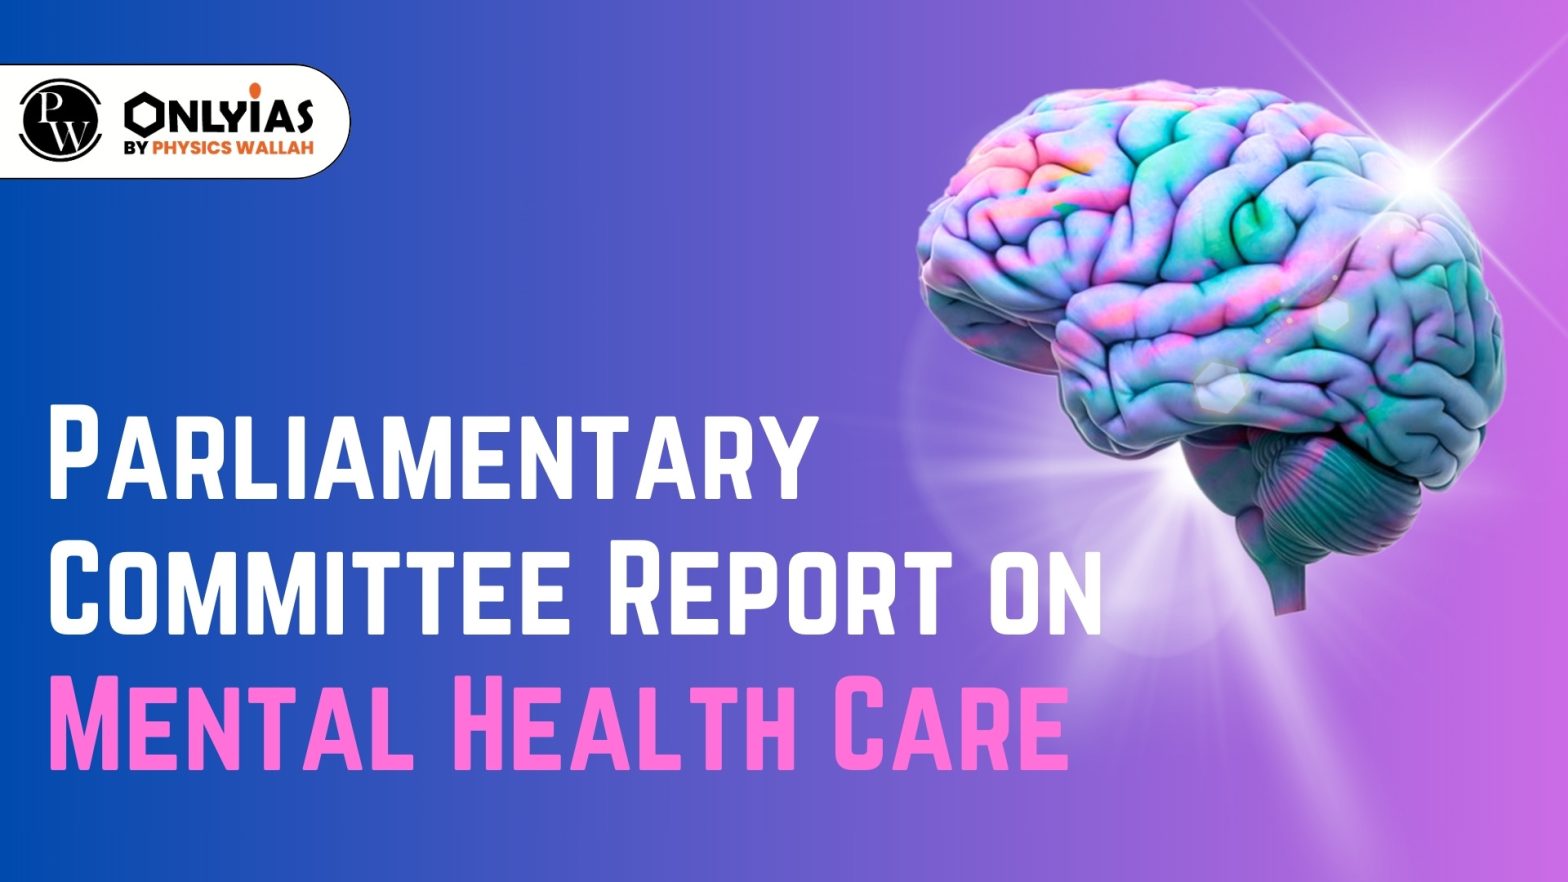 Parliamentary Committee Report on Mental Health Care